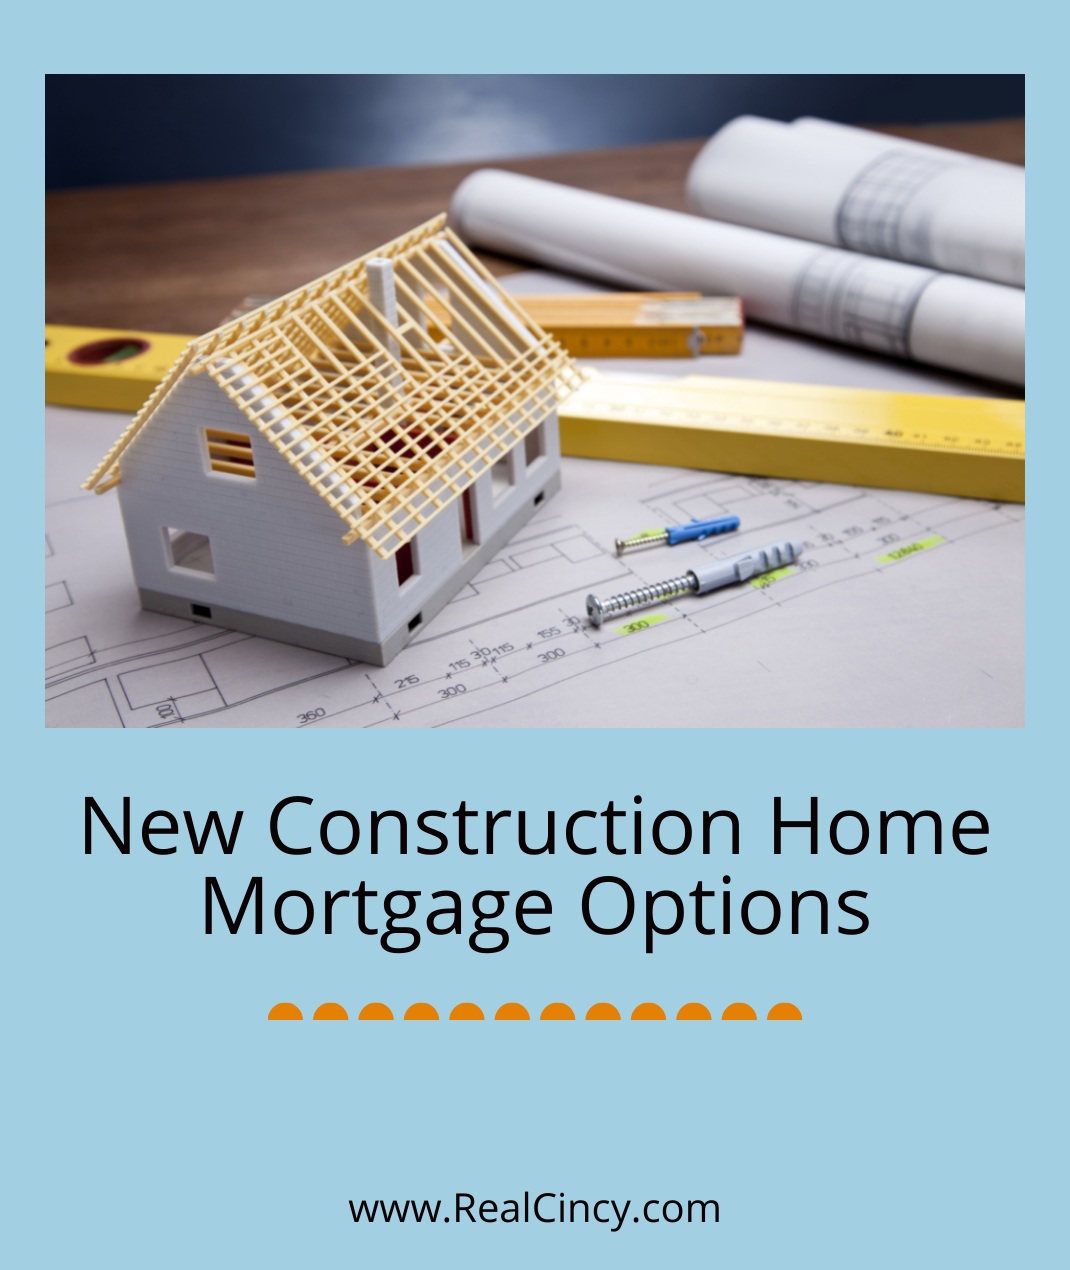 New Construction Home Mortgage Options